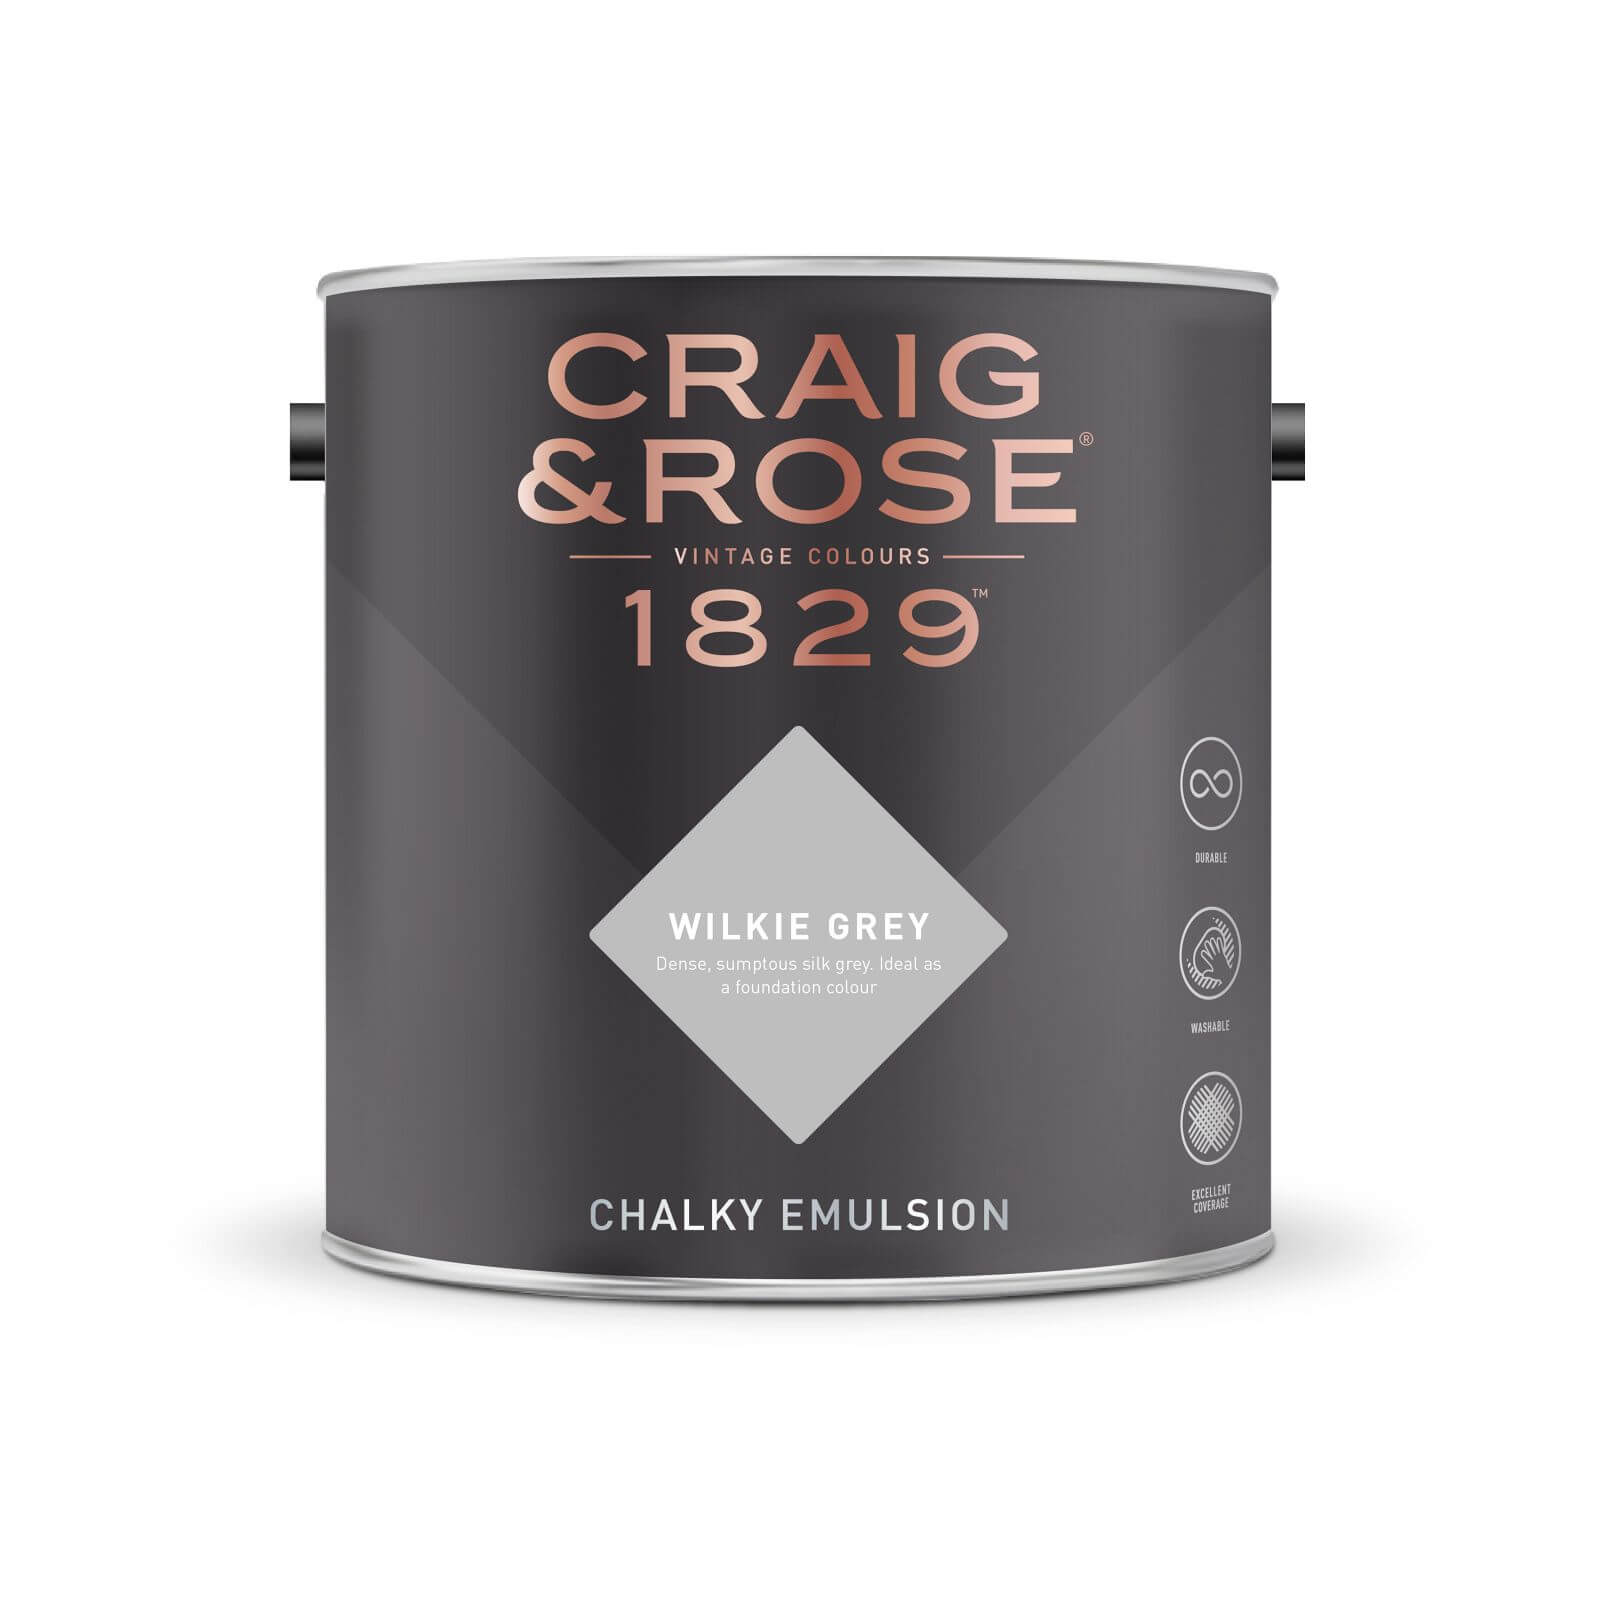 Craig & Rose 1829 Chalky Emulsion Paint Wilkie Grey - 5L